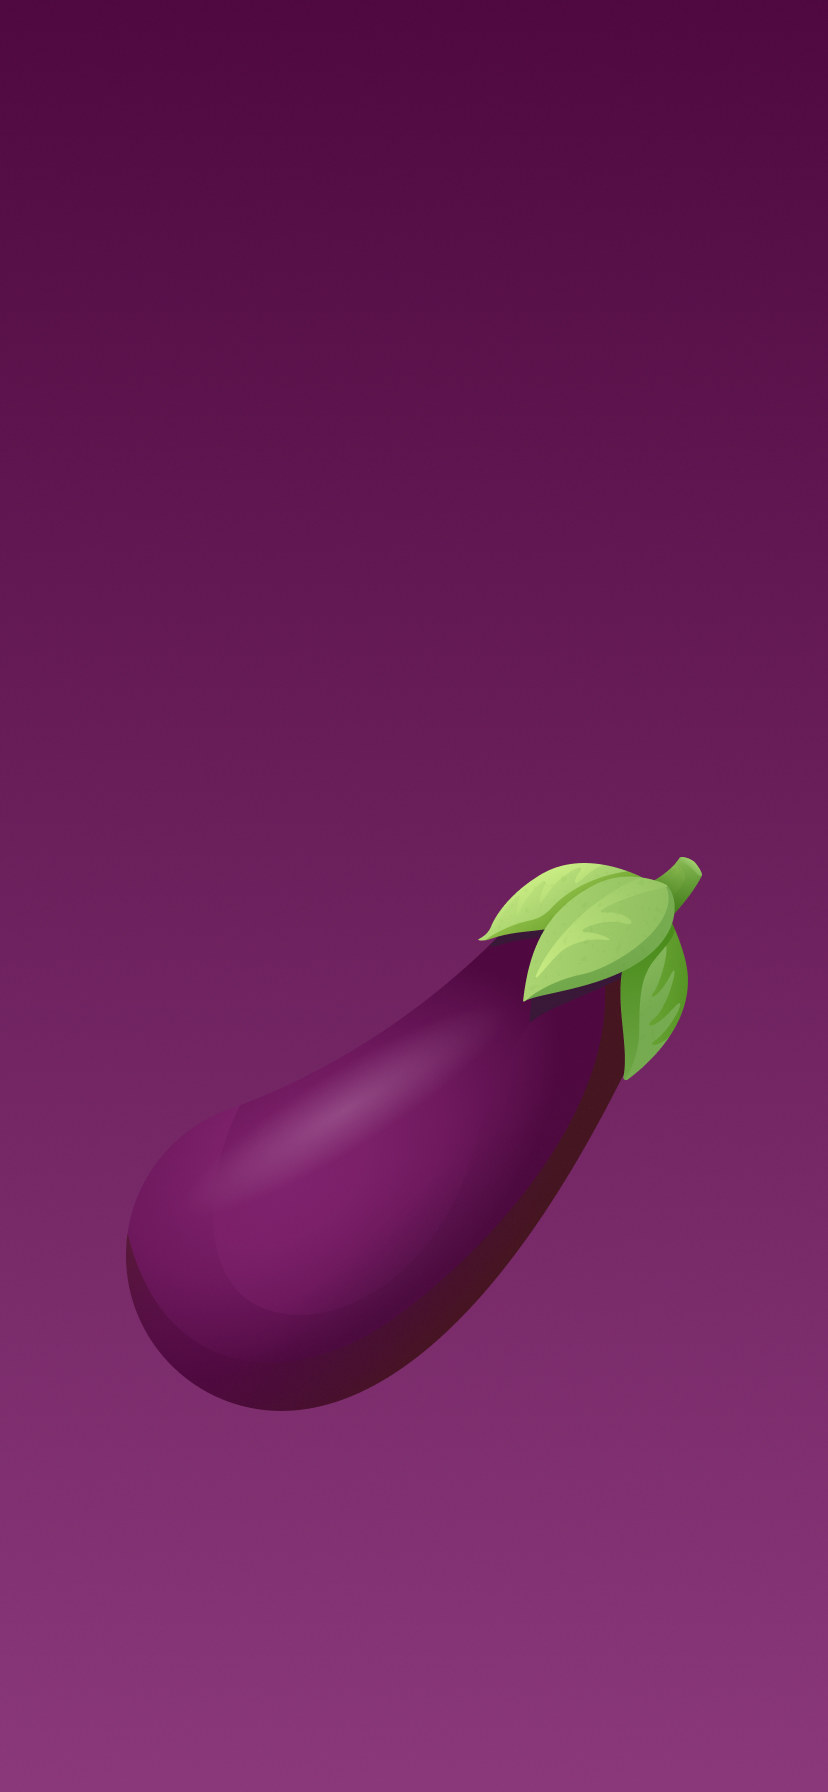 Aesthetic Eggplant Wallpapers - Wallpaper Cave